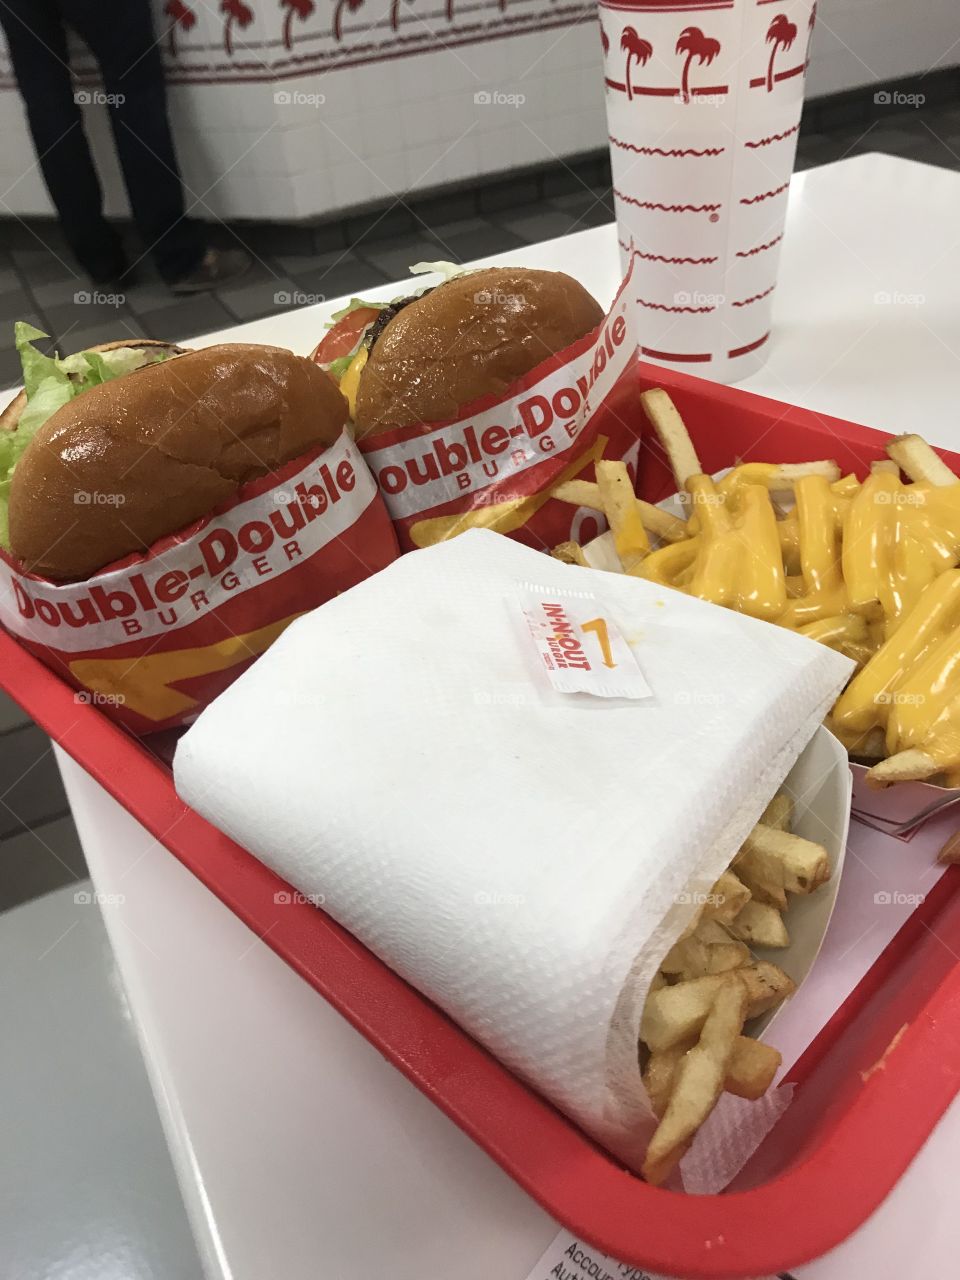 Tray of two burgers and fries